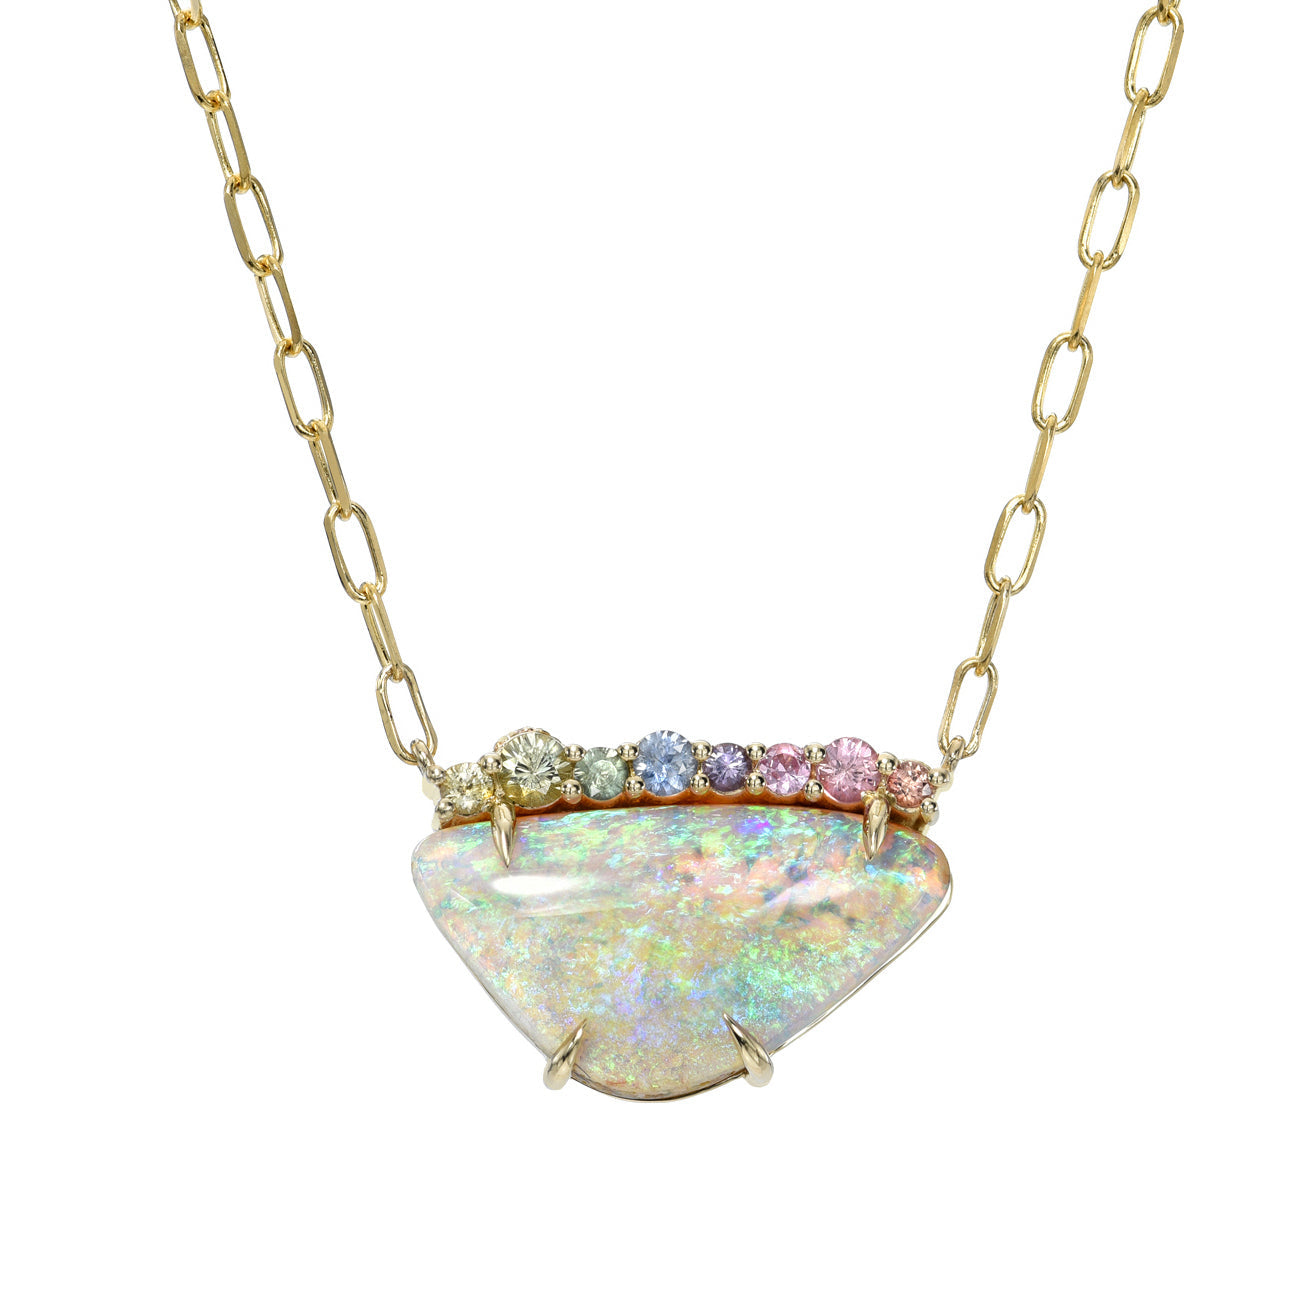 An Australian Opal Necklace by NIXIN Jewelry with a Crystal Opal and sapphires hanging in front of a white backdrop.